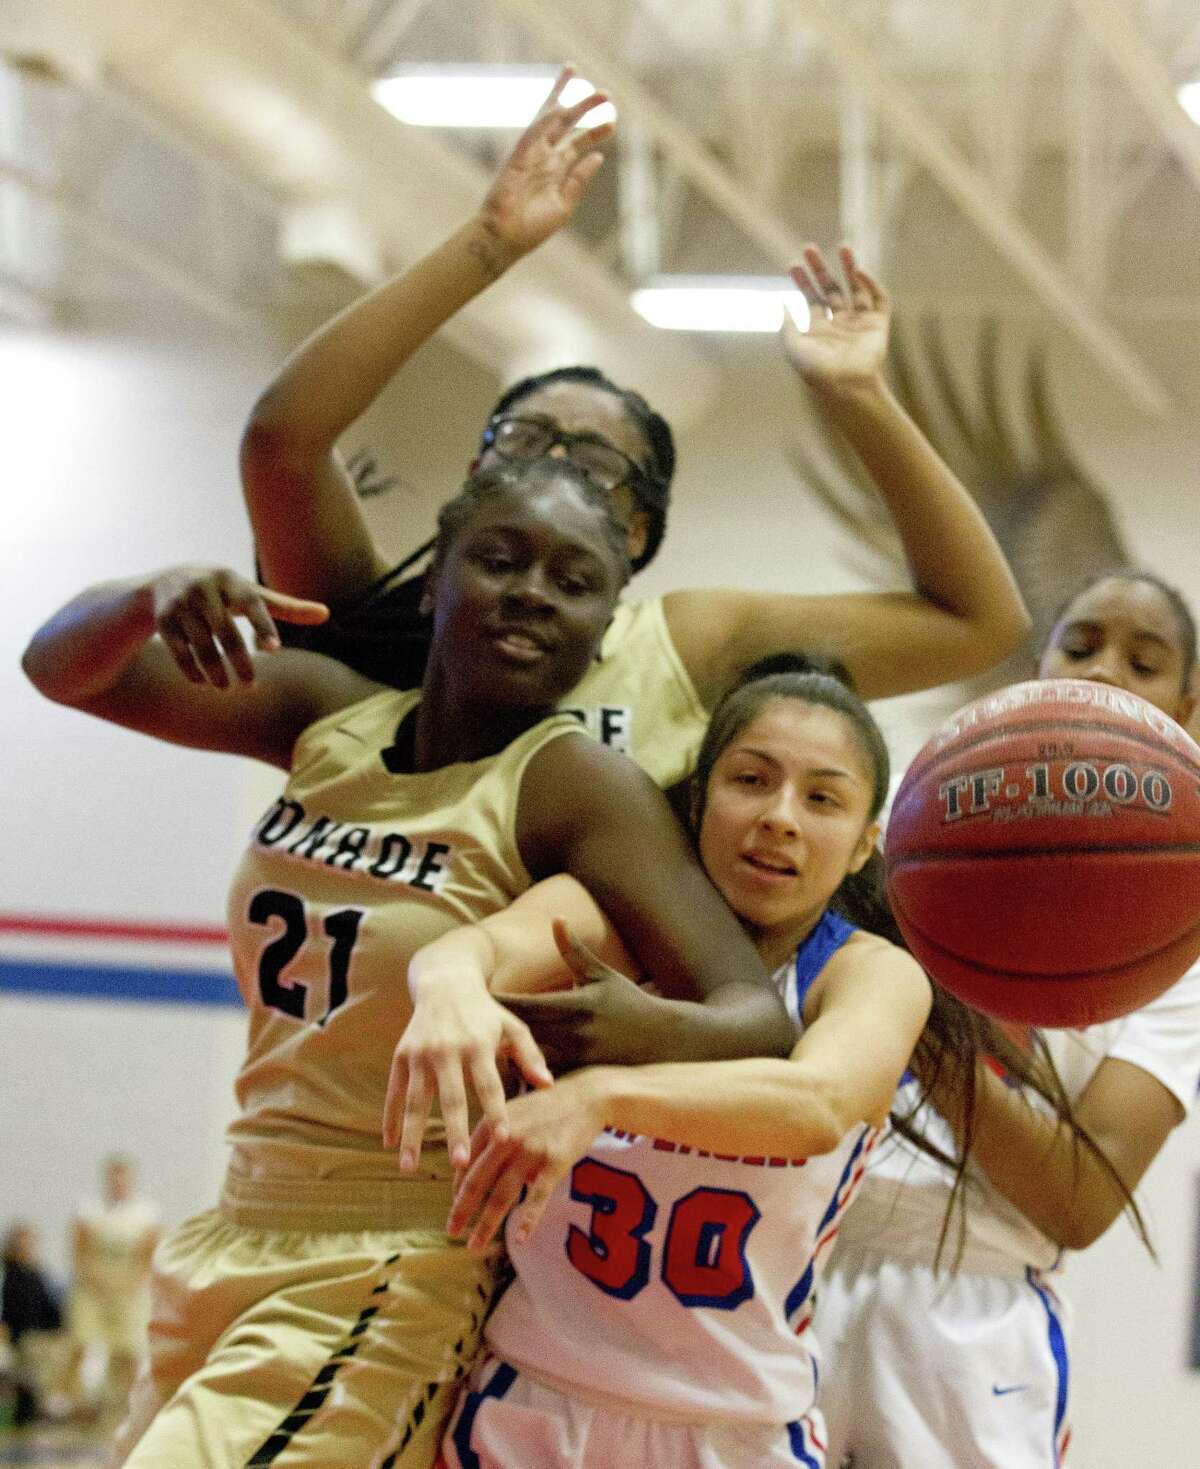 Conroe power forward Dee Anderson (21) and Oak Ridge point guard Alyssa Gonzales (30) go after a rebound during the first quarter of a District 15-6A high school basketball game at Oak Ridge High School, Saturday, Jan. 5, 2019, in Oak Ridge.